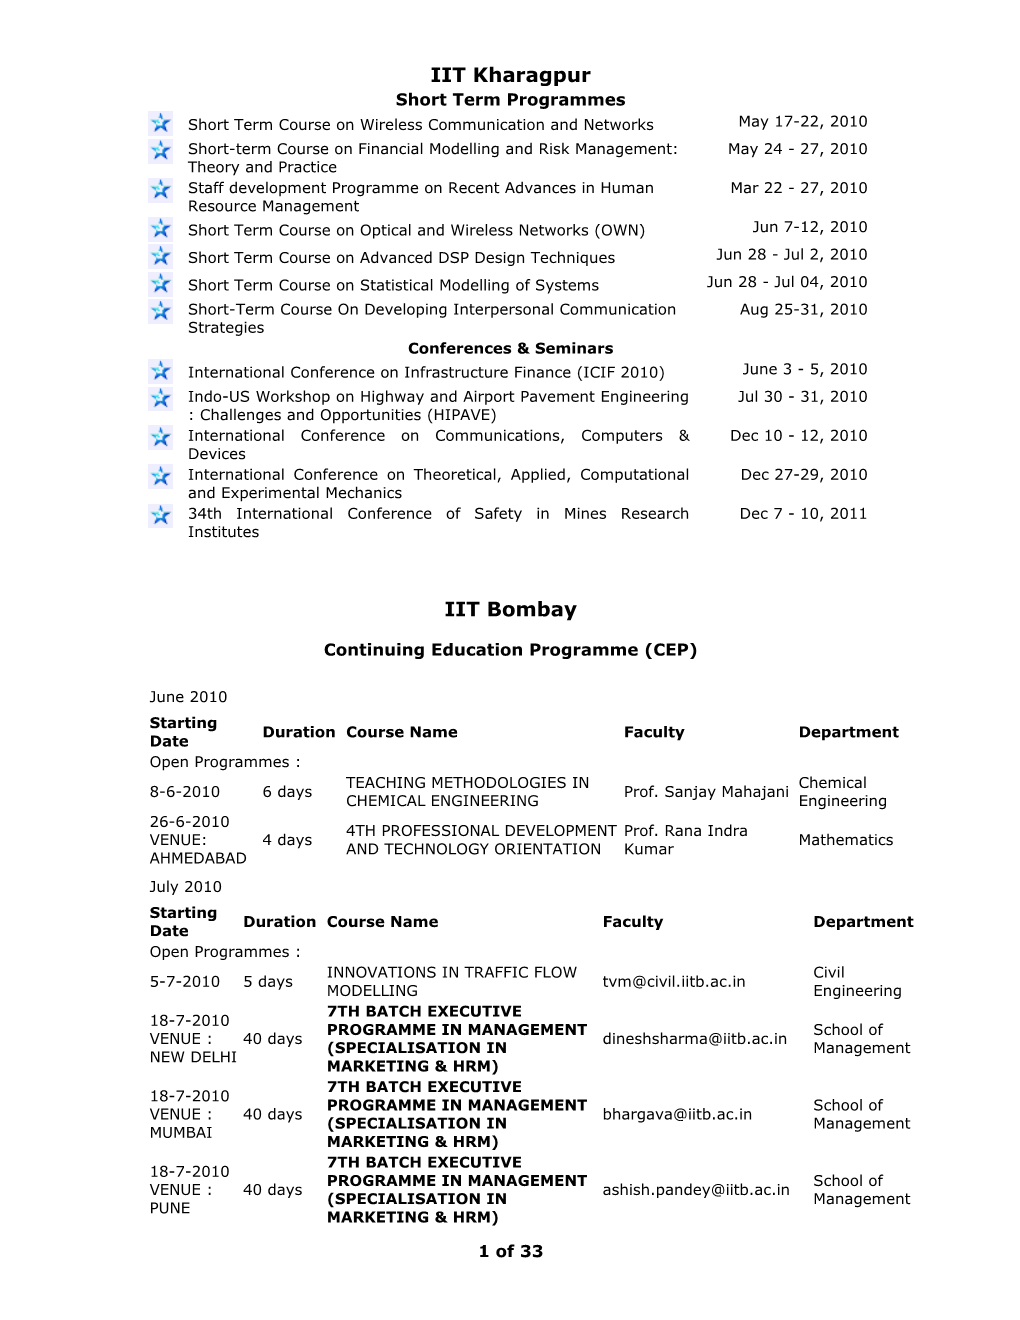 List of Qip Short Term Courses Proposed for the Year 2010 at Iit Bombay